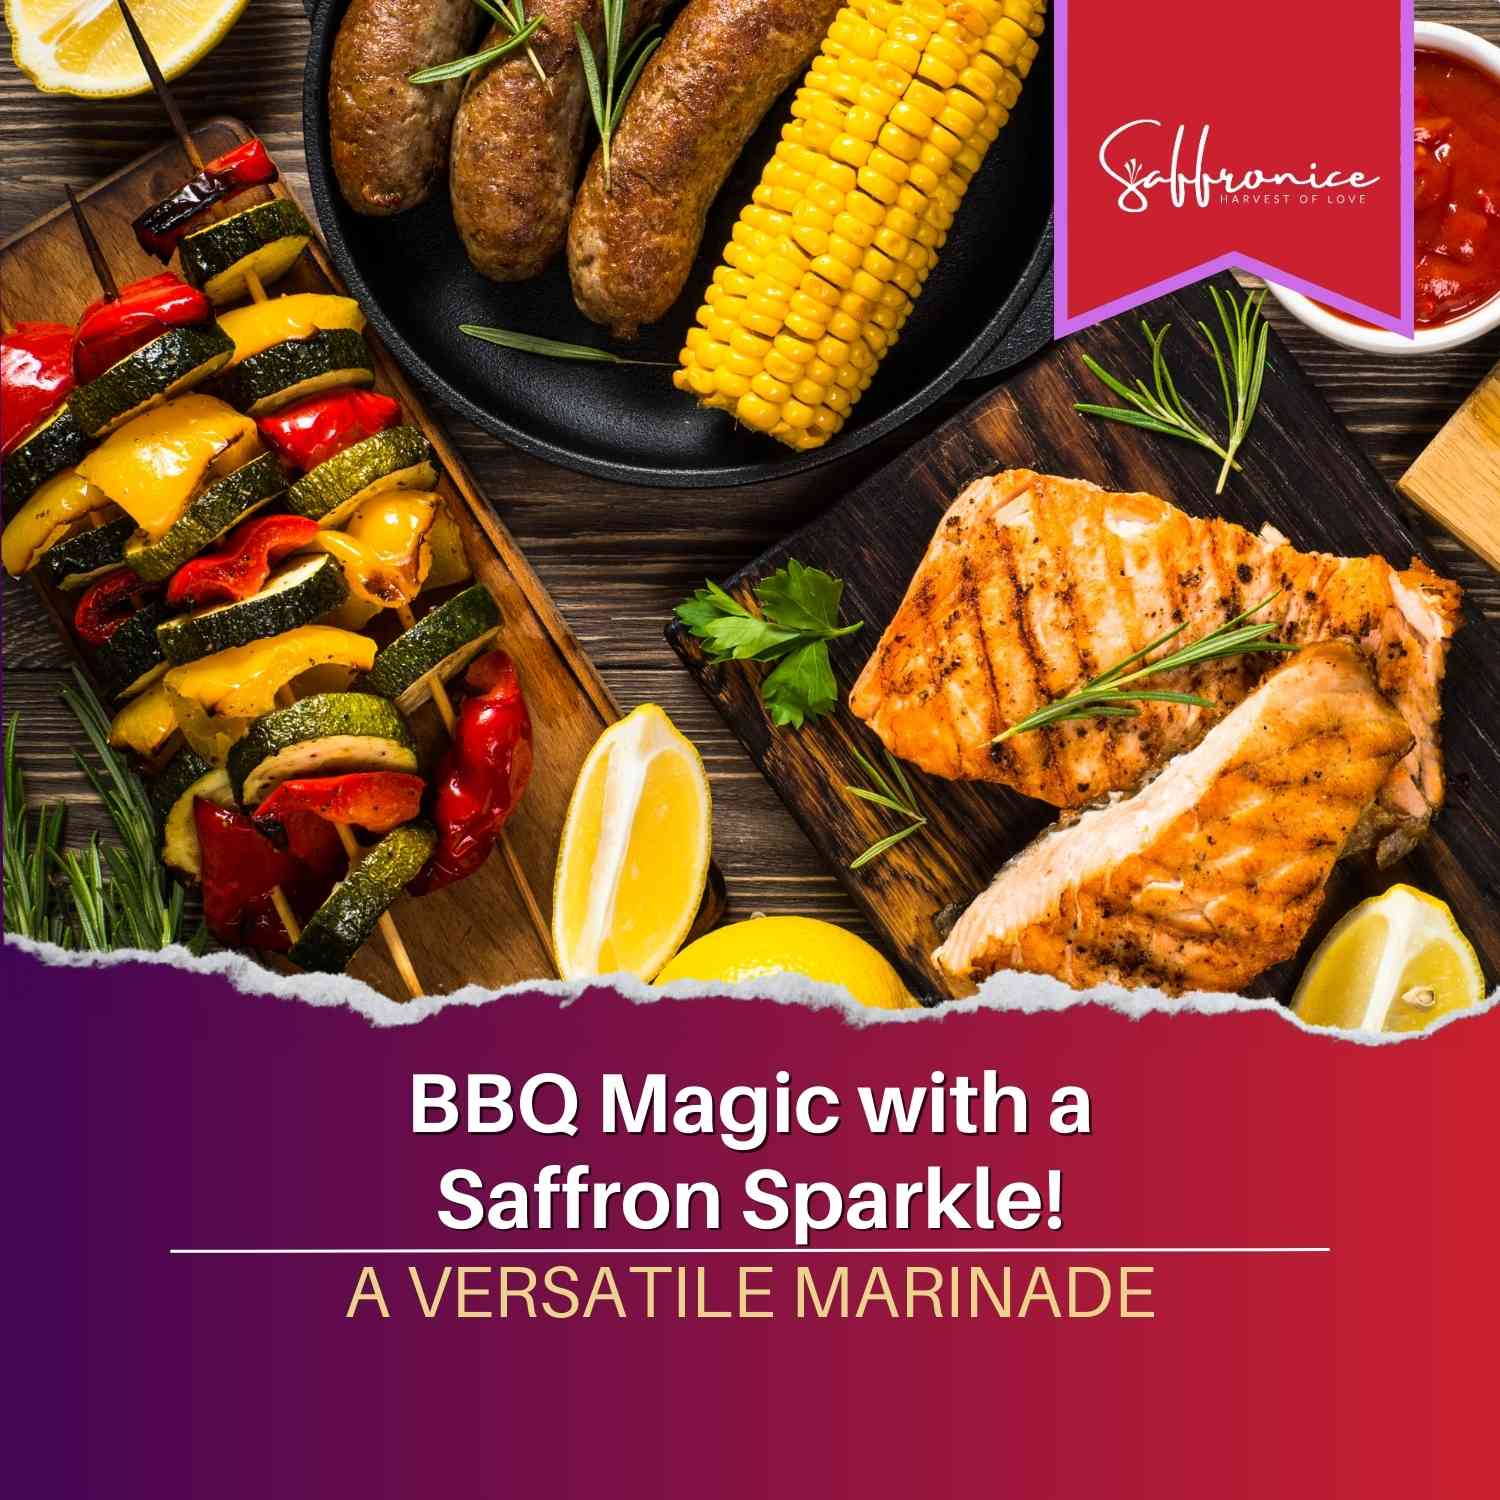 Grilled delights with saffron BBQ flavor